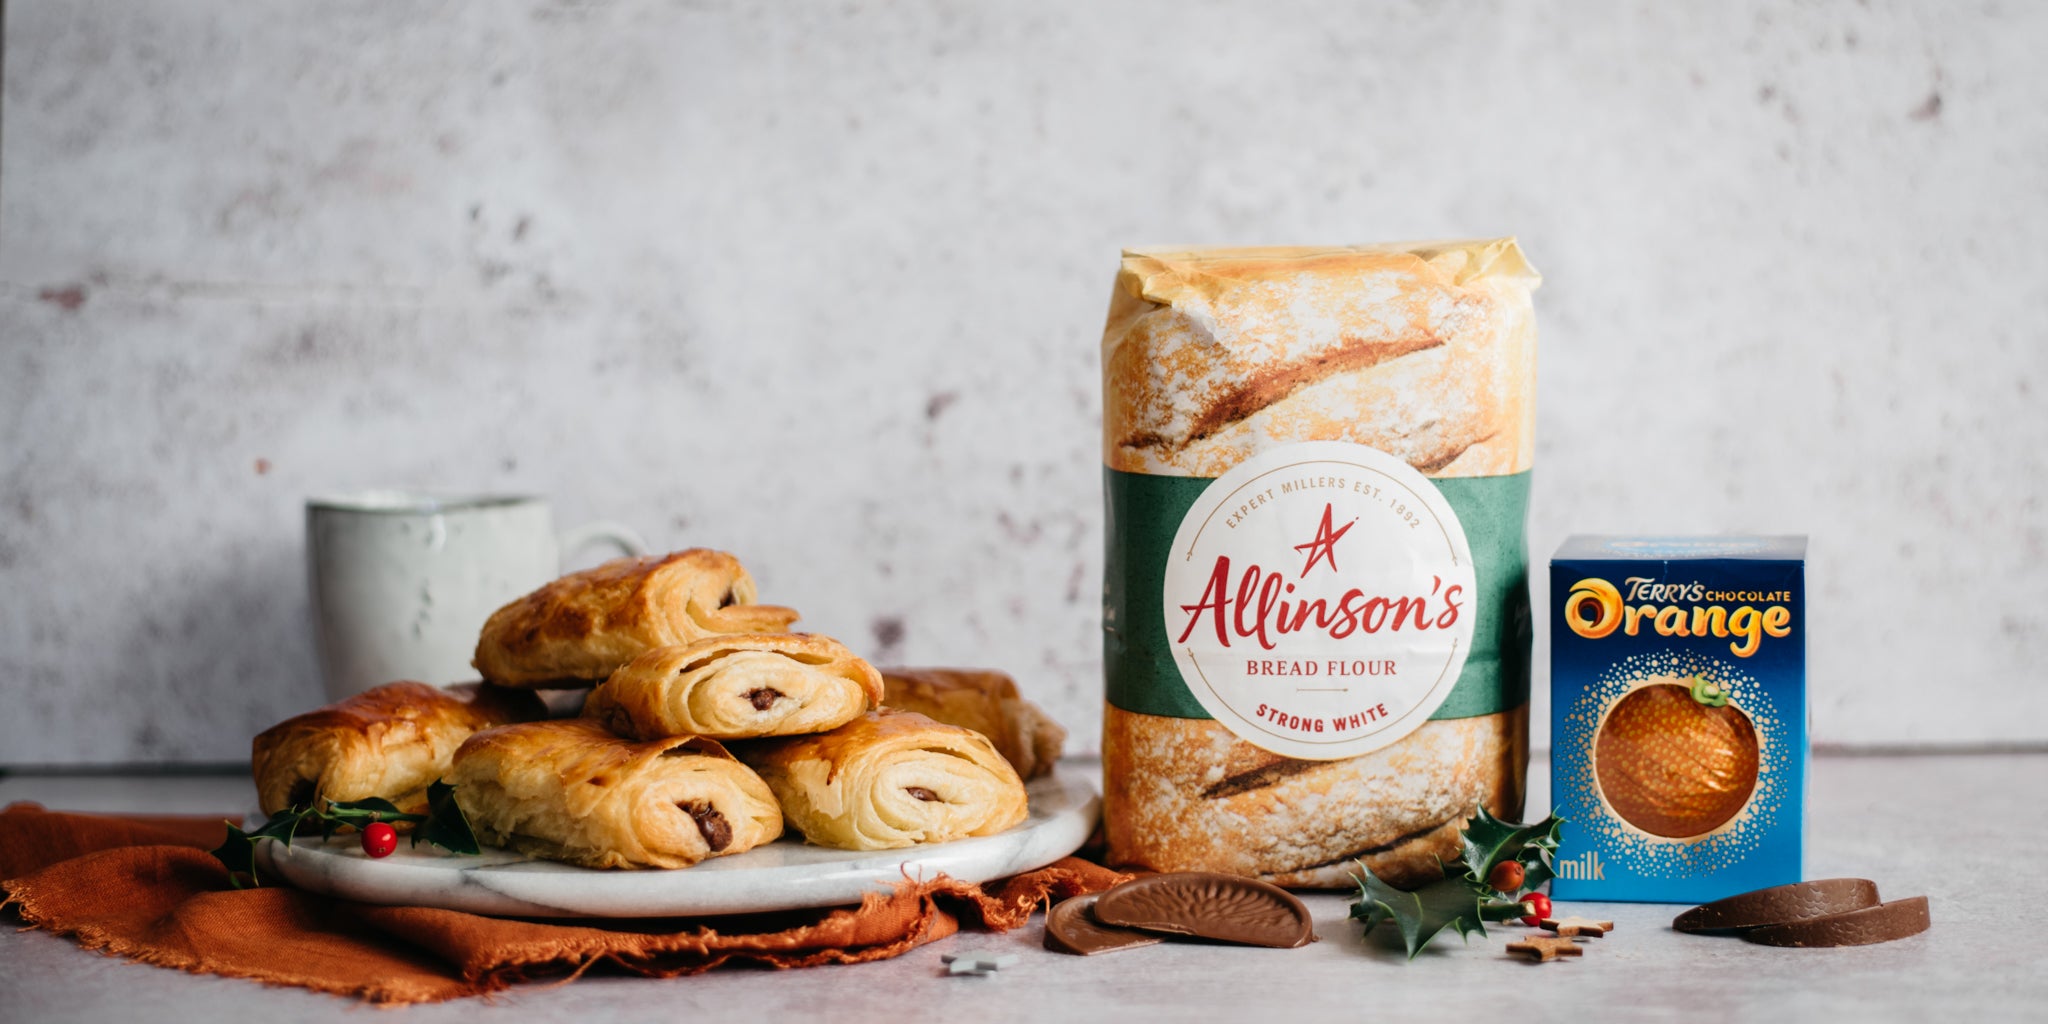 A plate of terrys chocolate orange pain au chocolat next to allinsons strong white bread flour and terrys chocolate orange